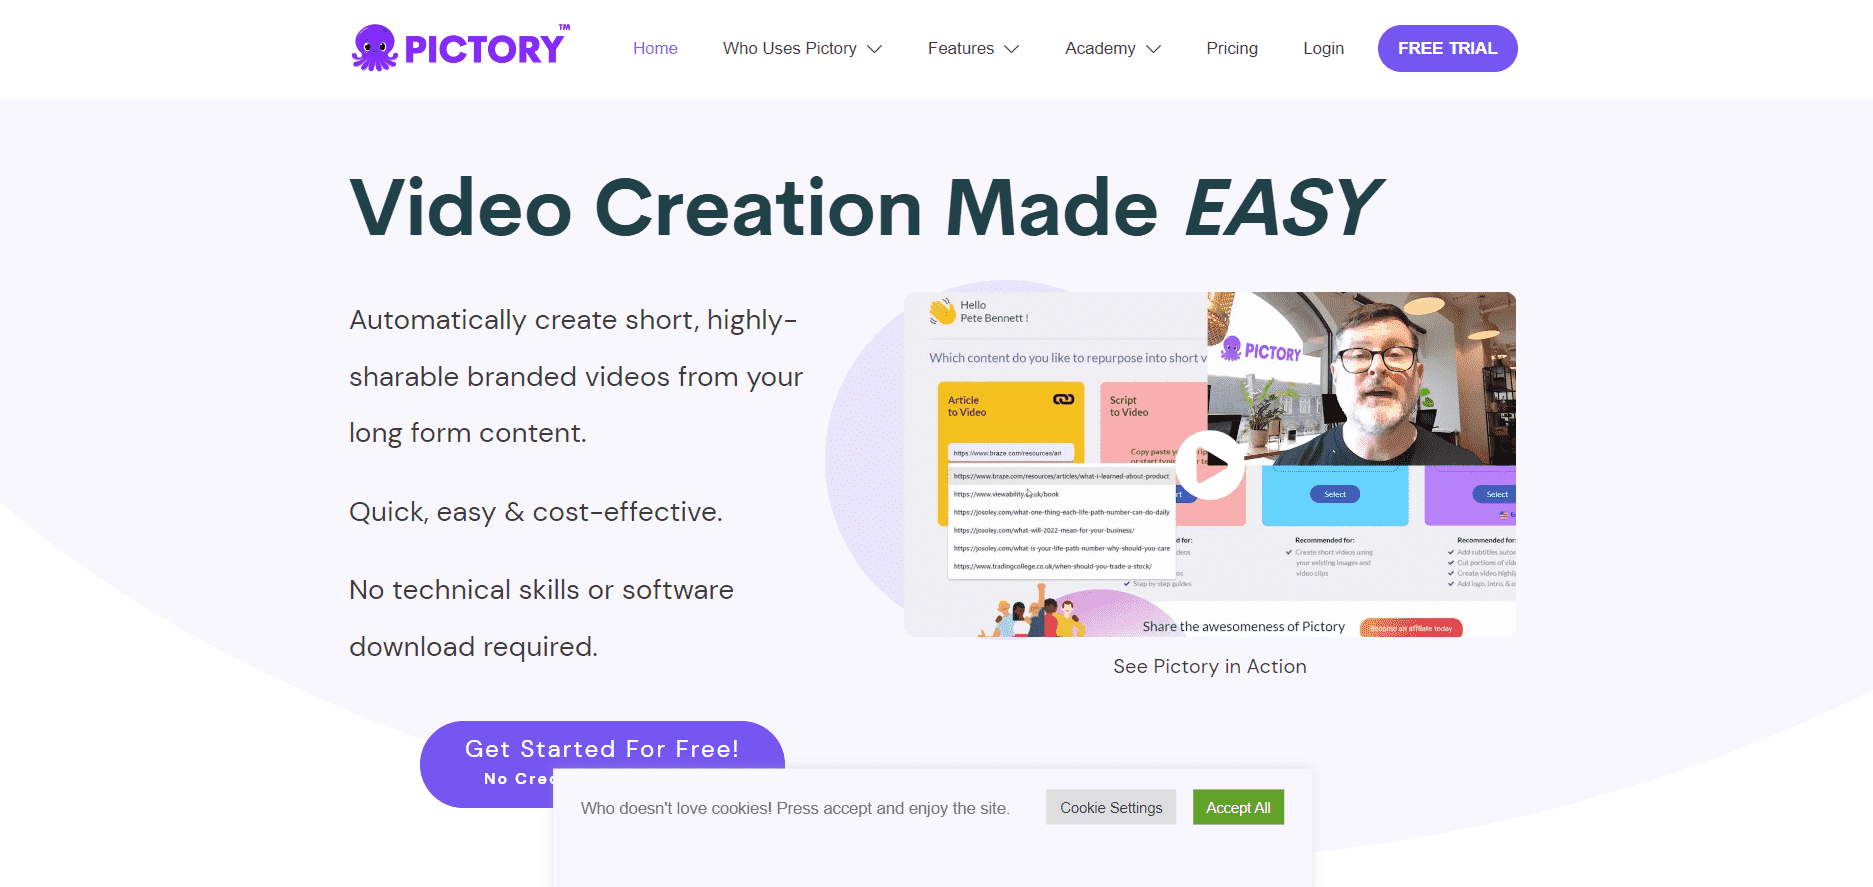  Pictory home page